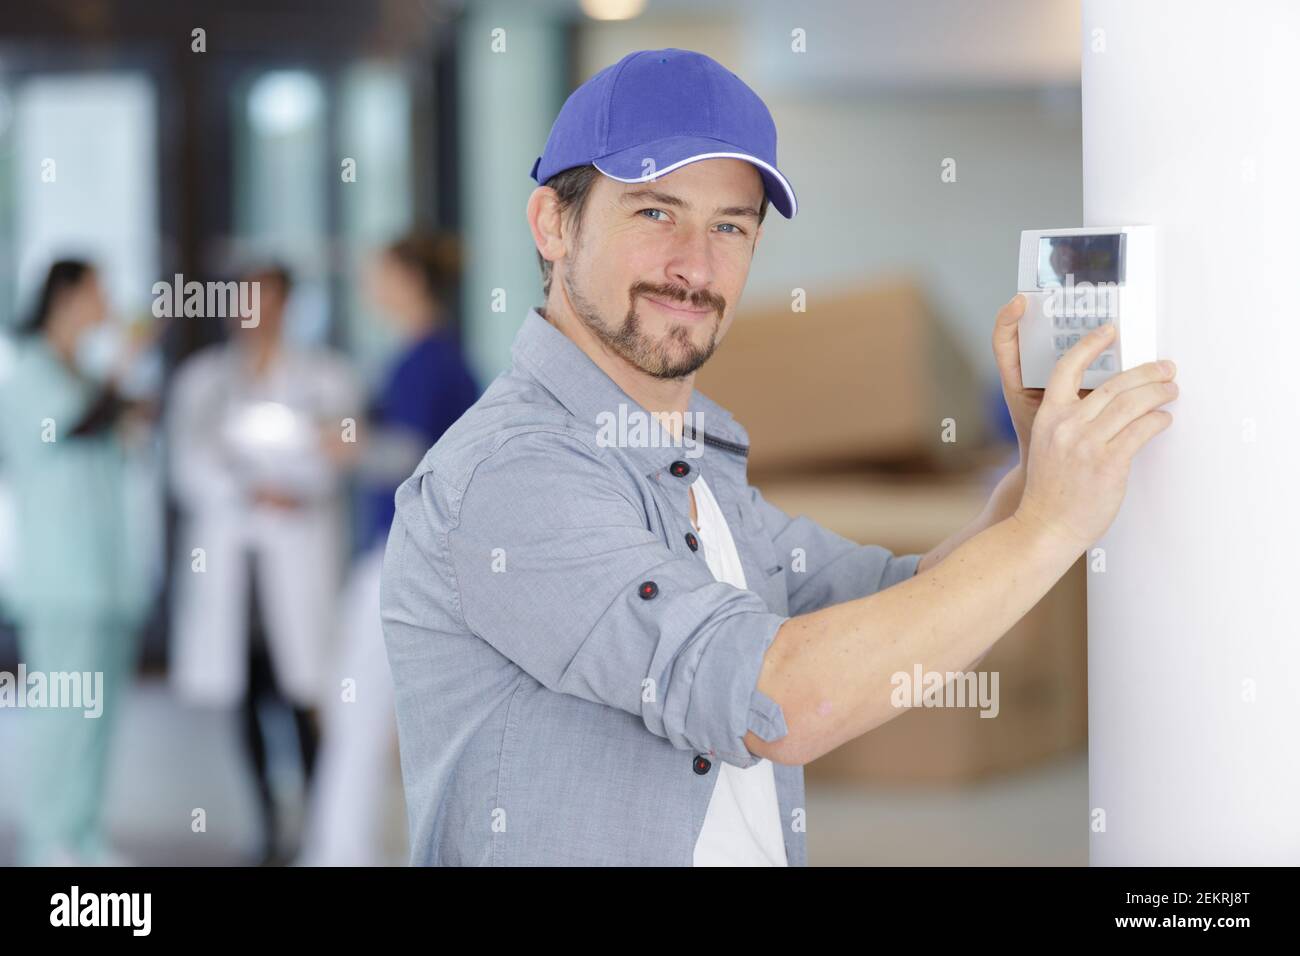 trained hvac technician checking troubleshooting a thermostat Stock Photo